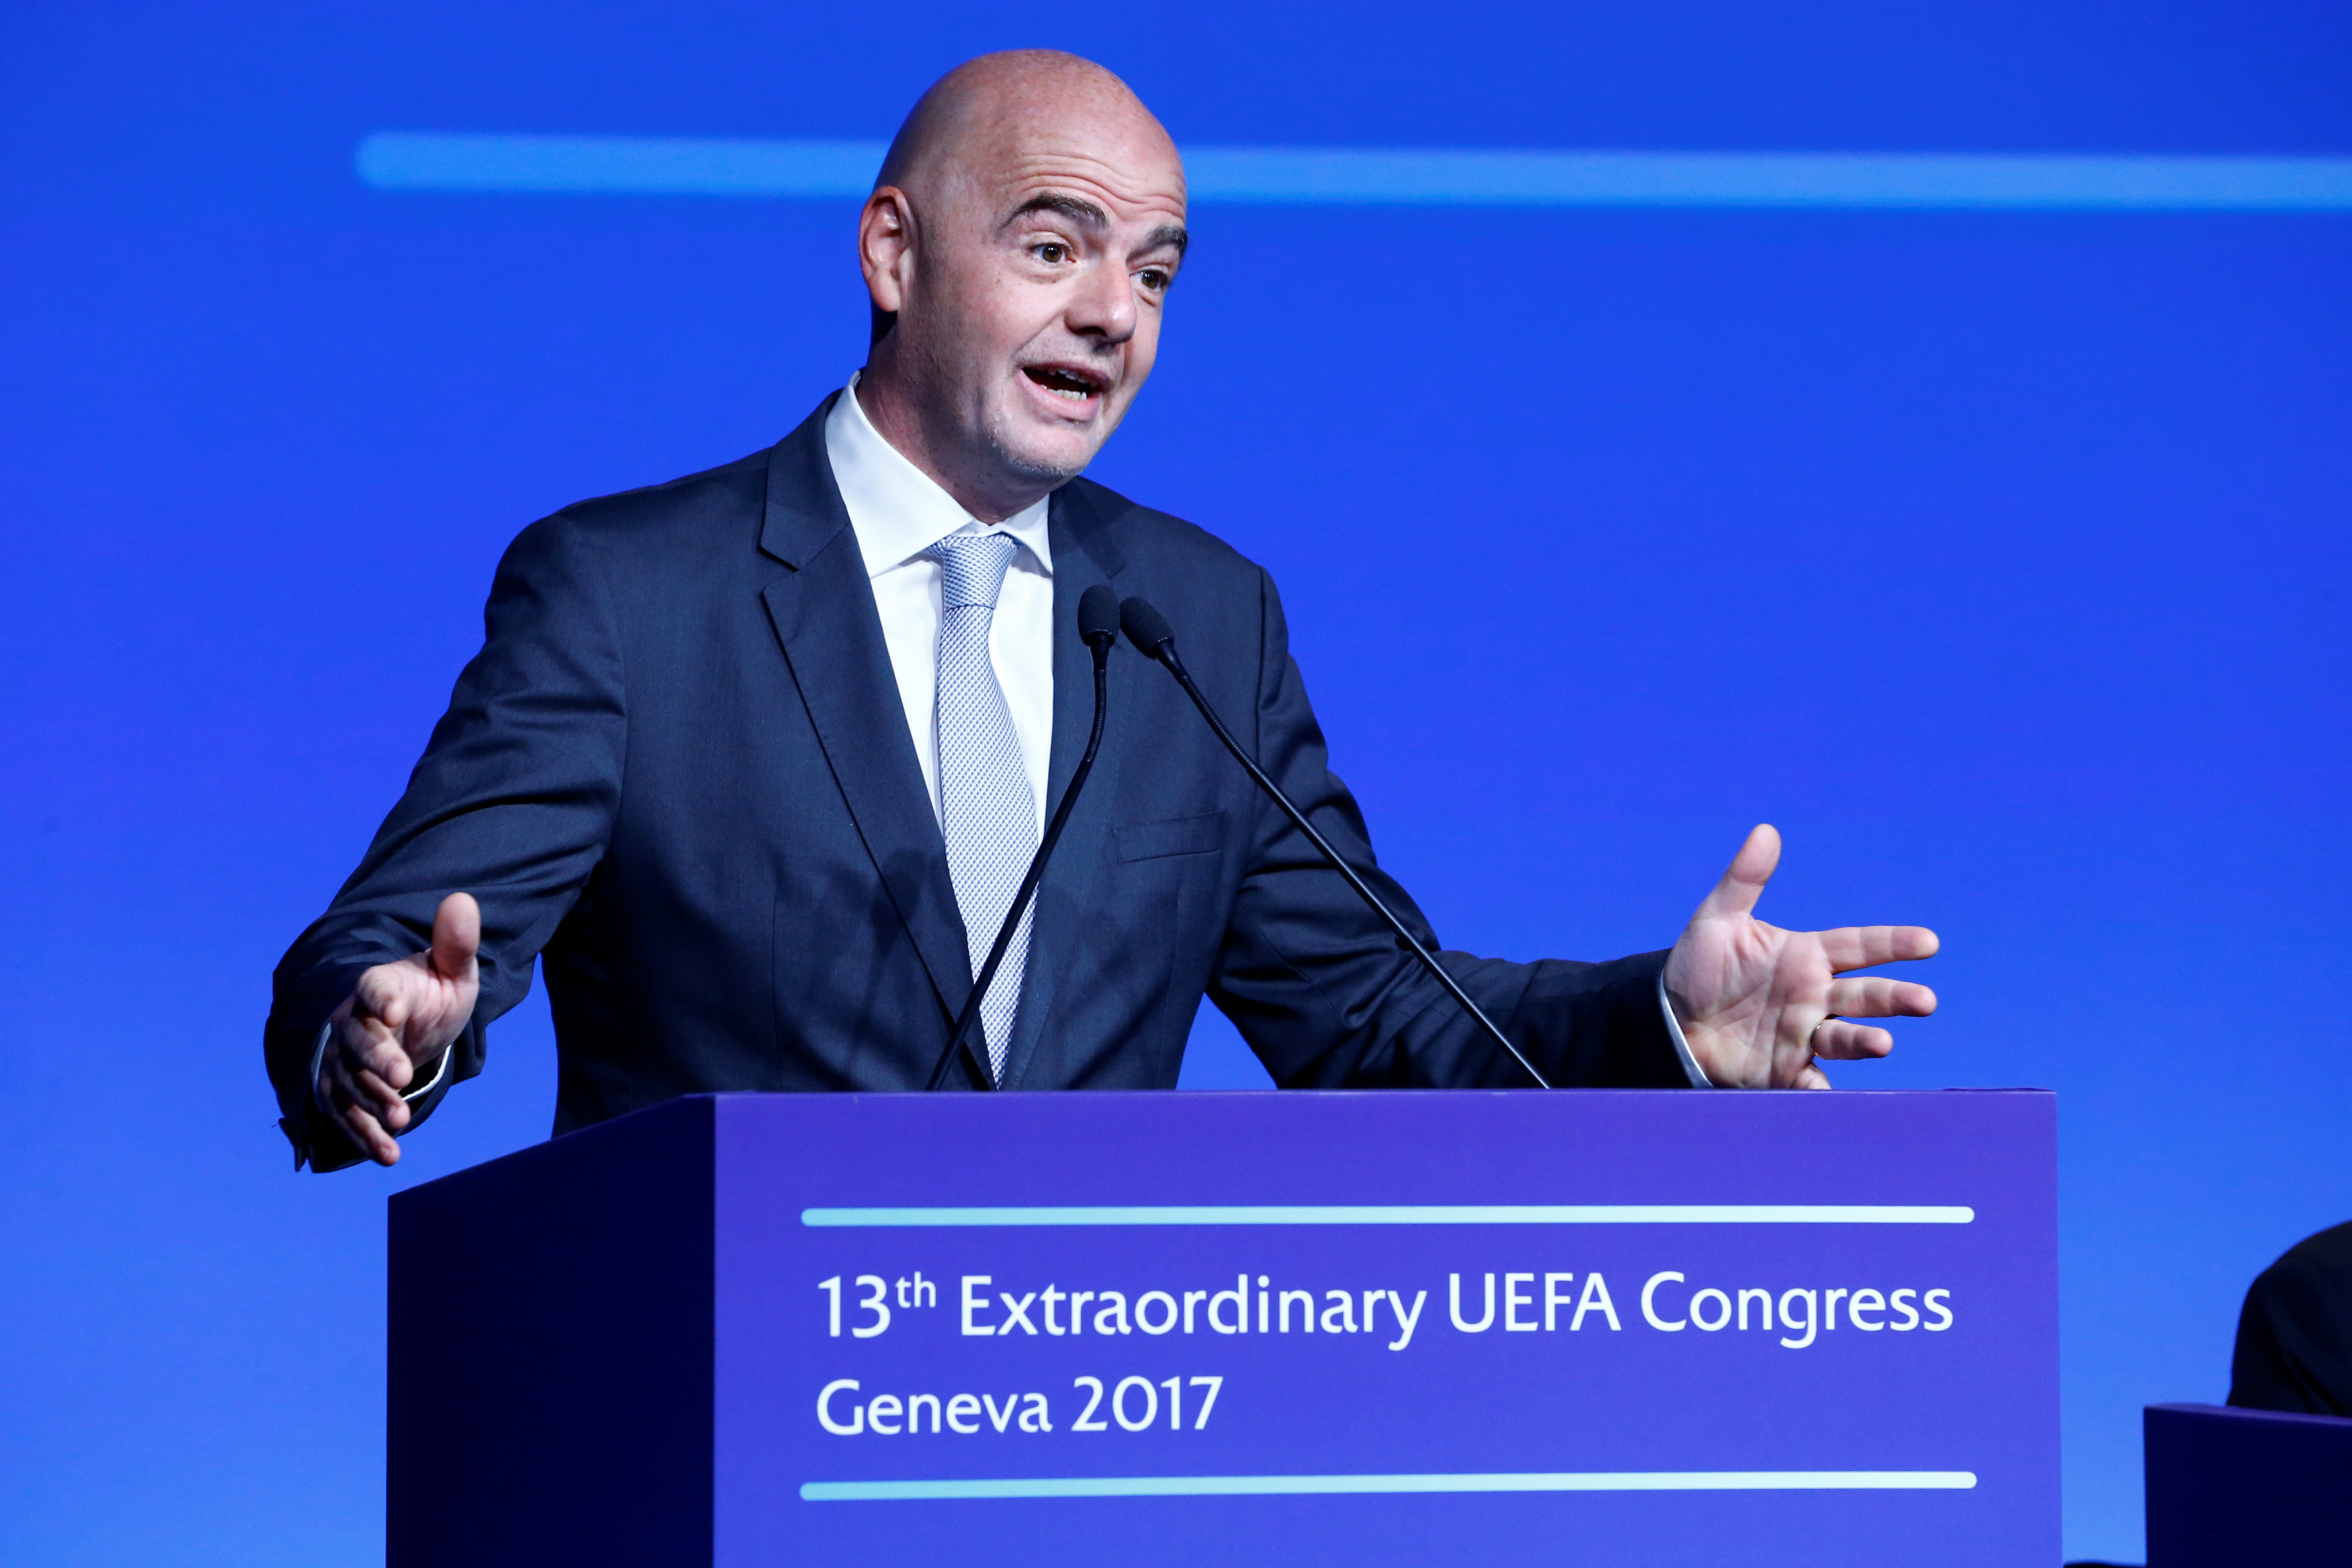 Football: FIFA chief Gianni Infantino says time to reform transfer 'rat race'